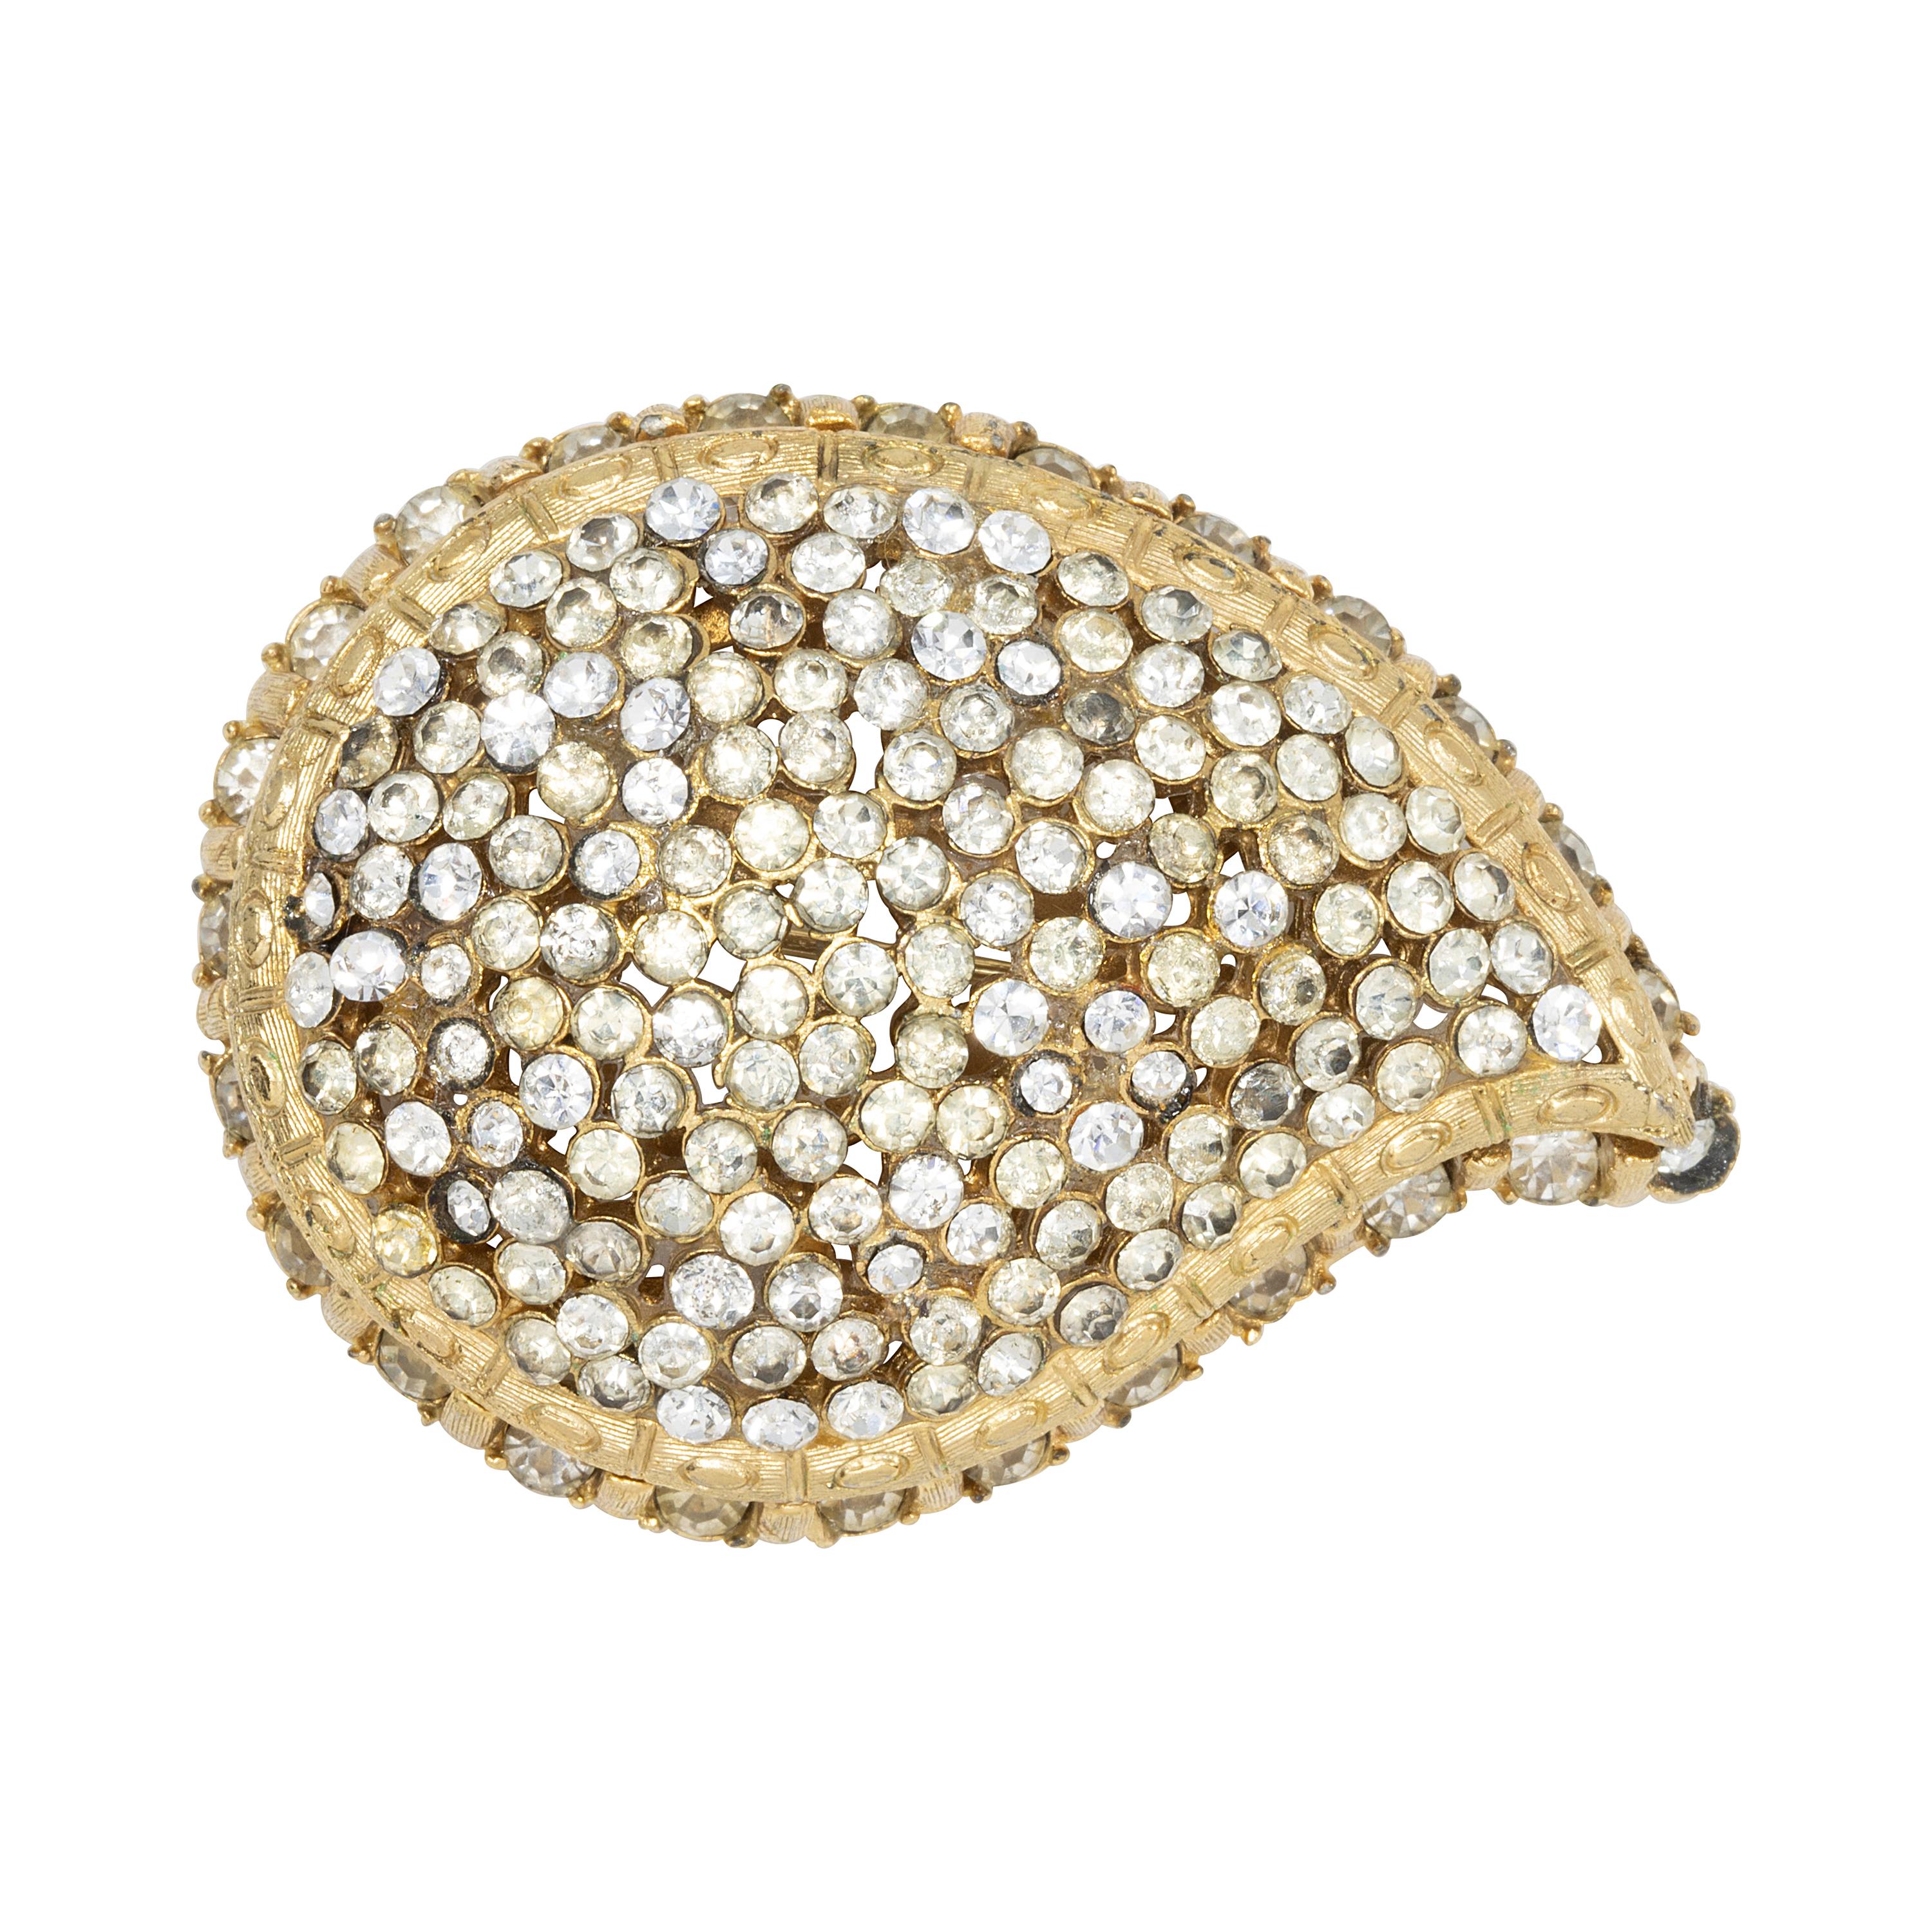 Capri Golden Paisley Pin Brooch with Clear Pave Crystals, 1960s